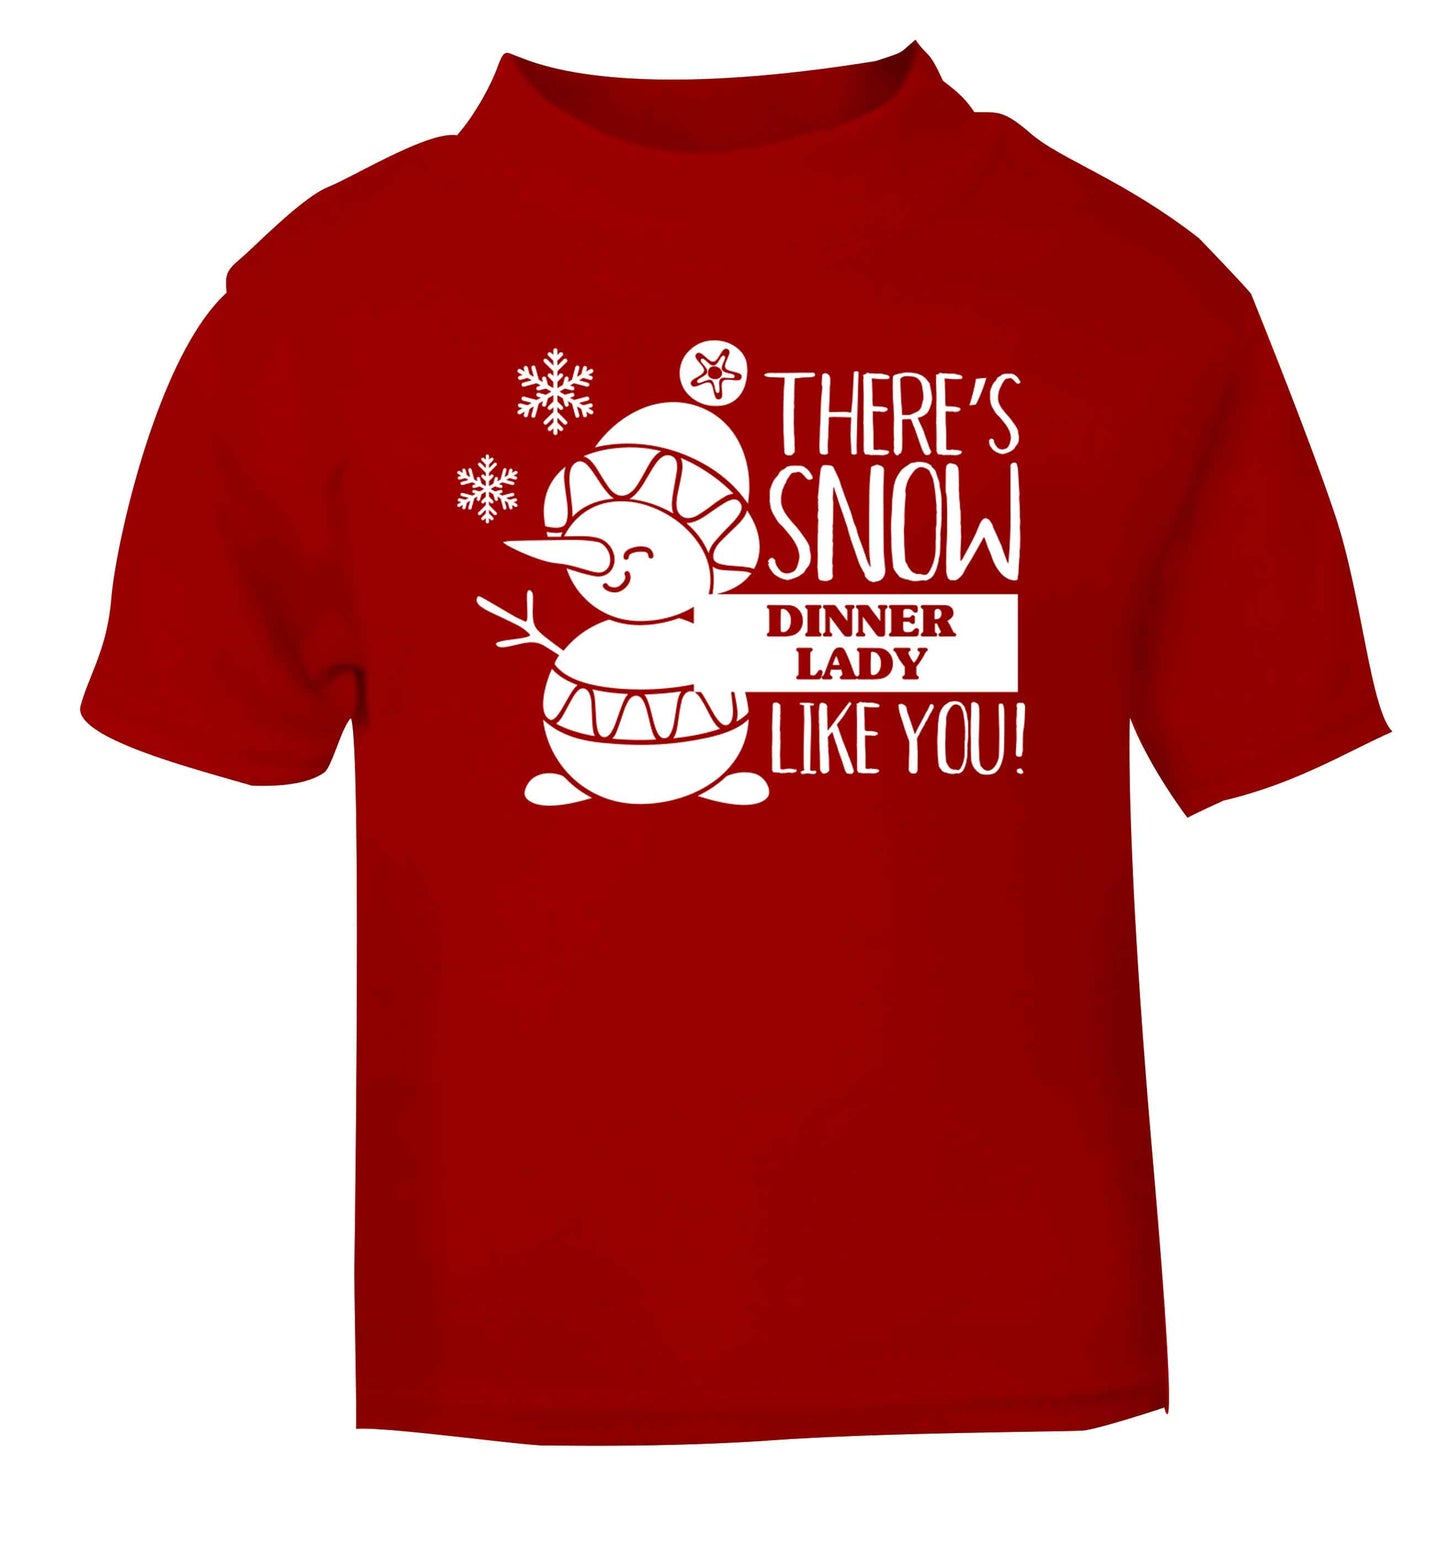 There's snow dinner lady like you red baby toddler Tshirt 2 Years